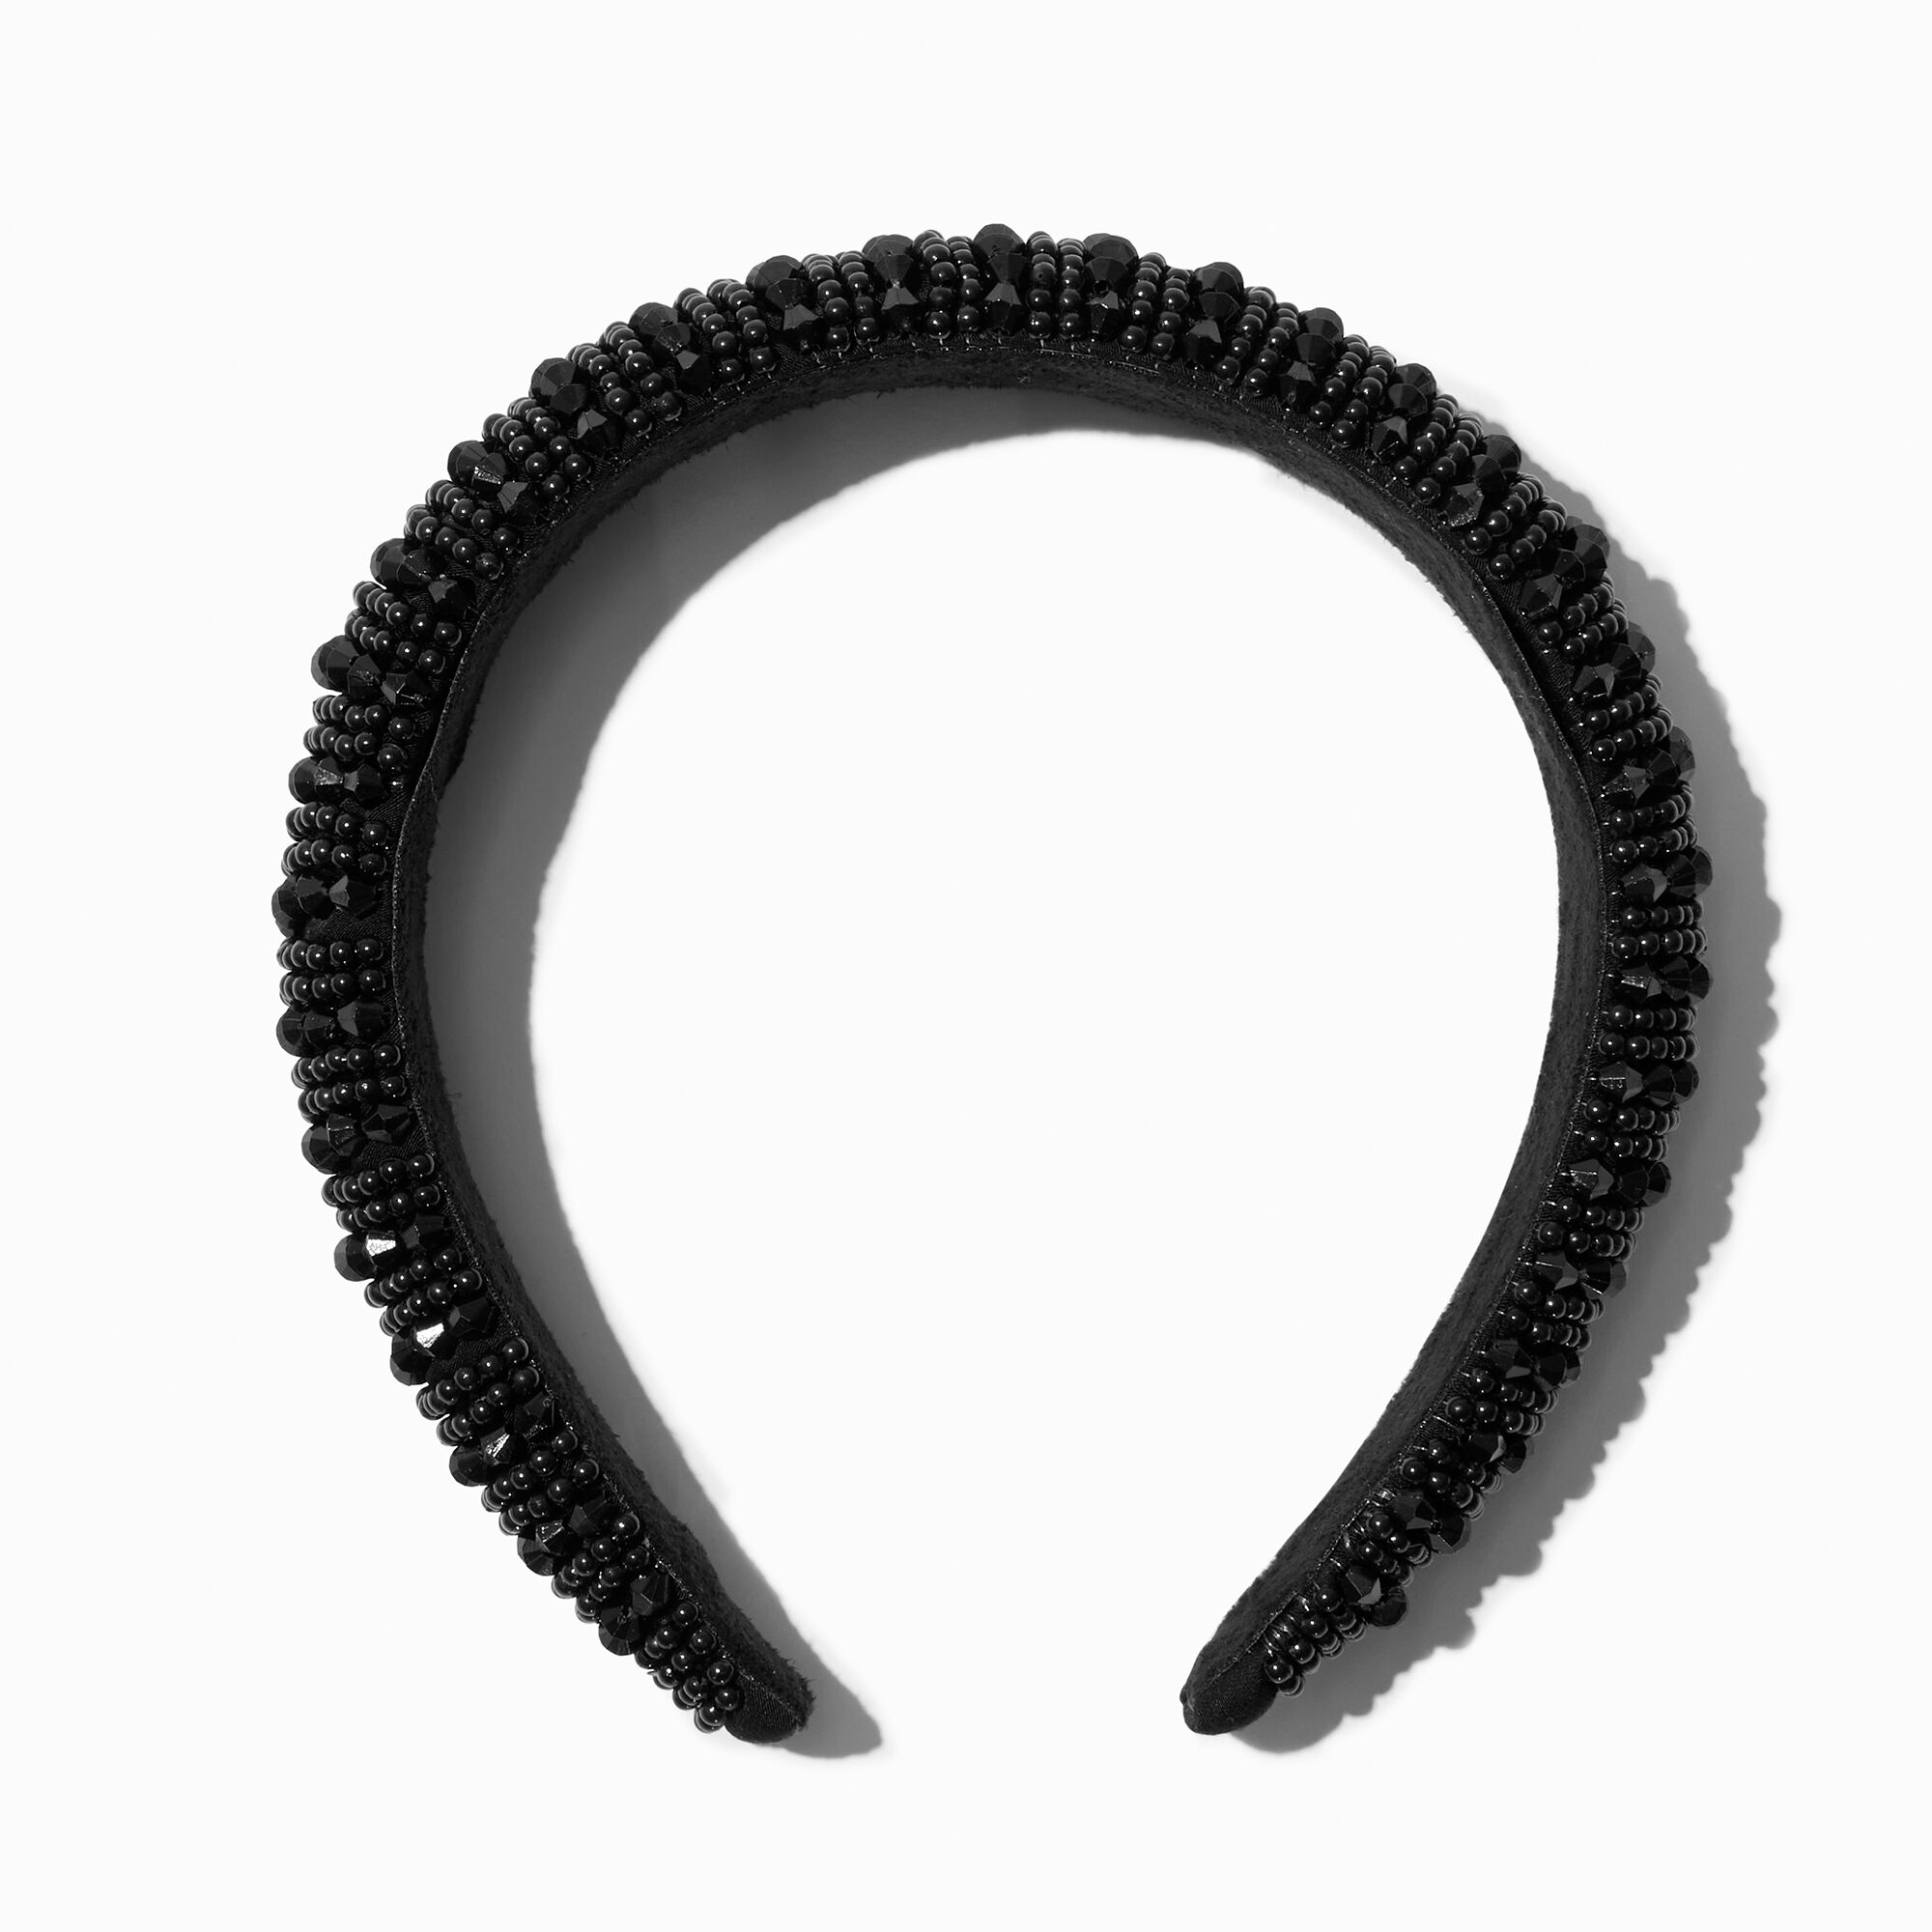 View Claires Crystal Embellished Puff Headband Black information